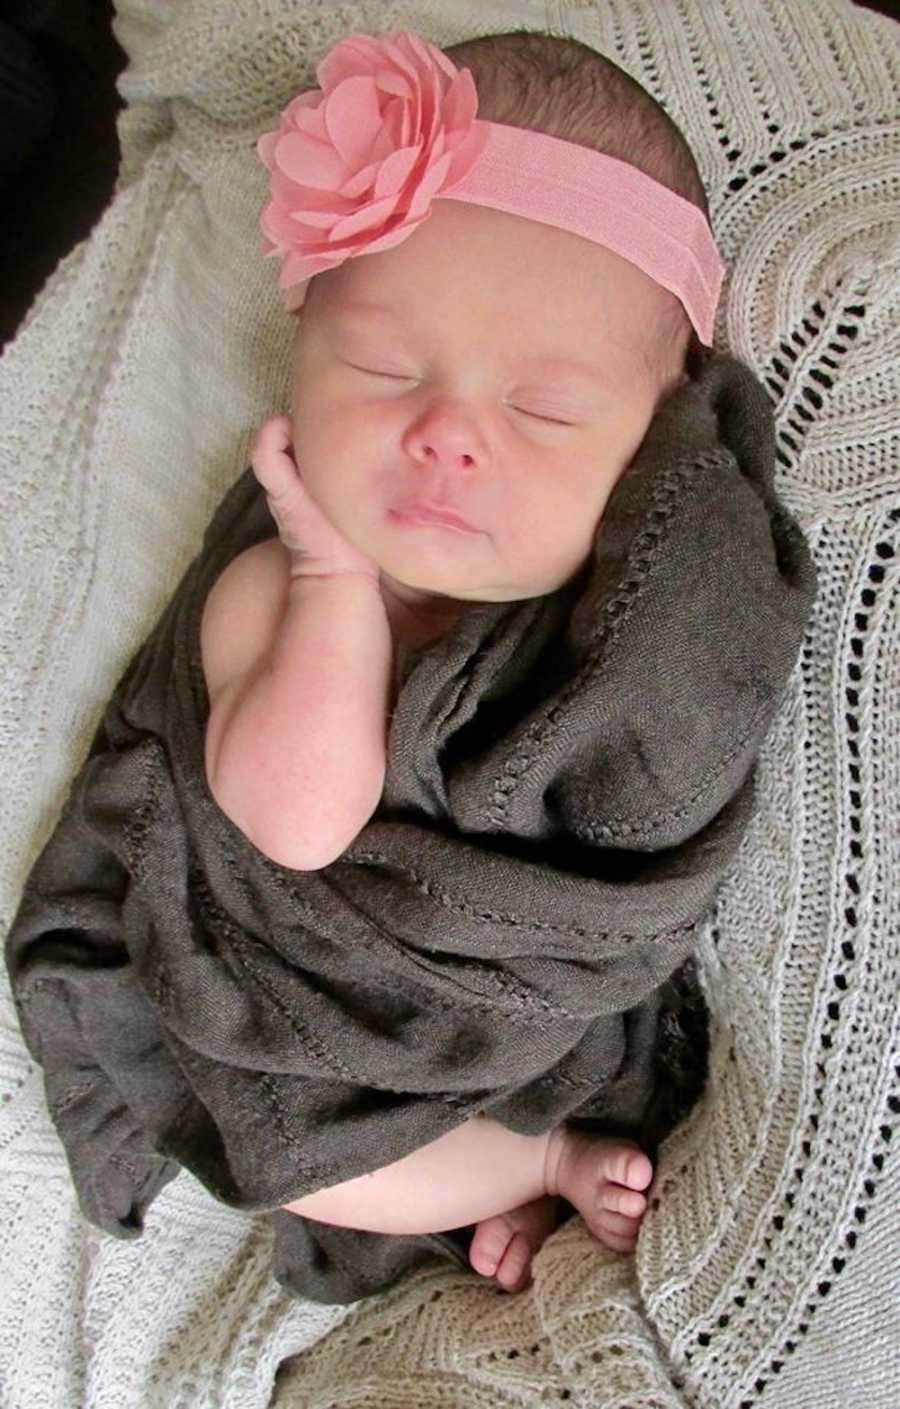 Baby girl with pink flower headband on lays sleeping swaddled in gray blanket